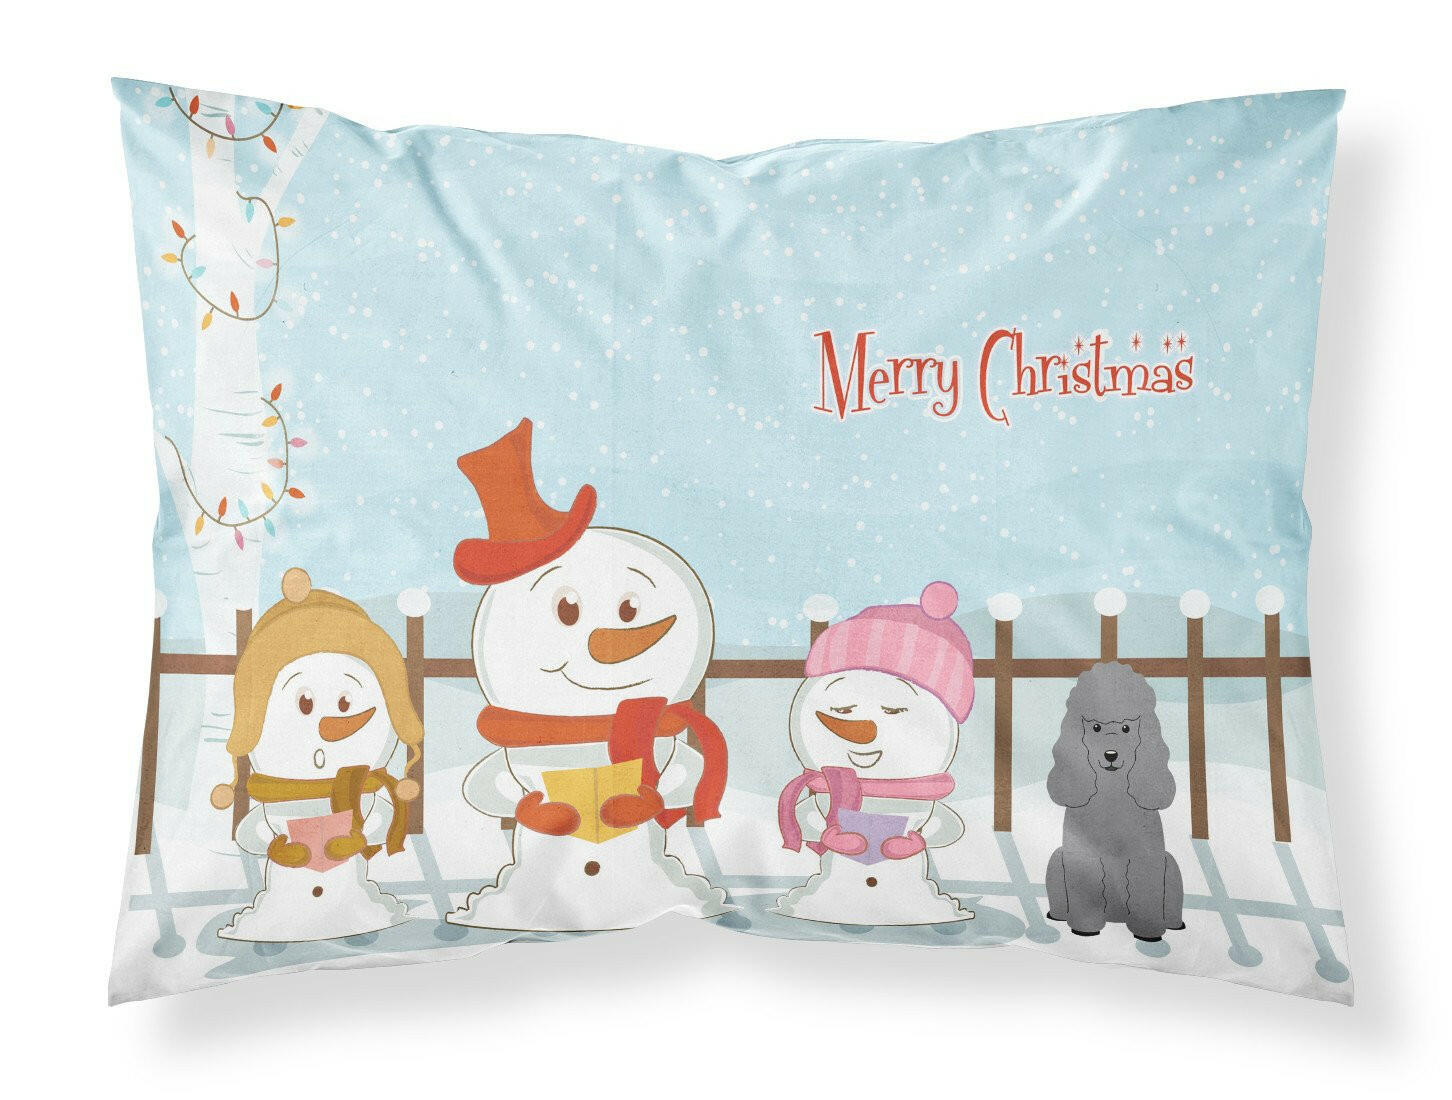 Merry Christmas Carolers Poodle Silver Fabric Standard Pillowcase BB2399PILLOWCASE by Caroline's Treasures